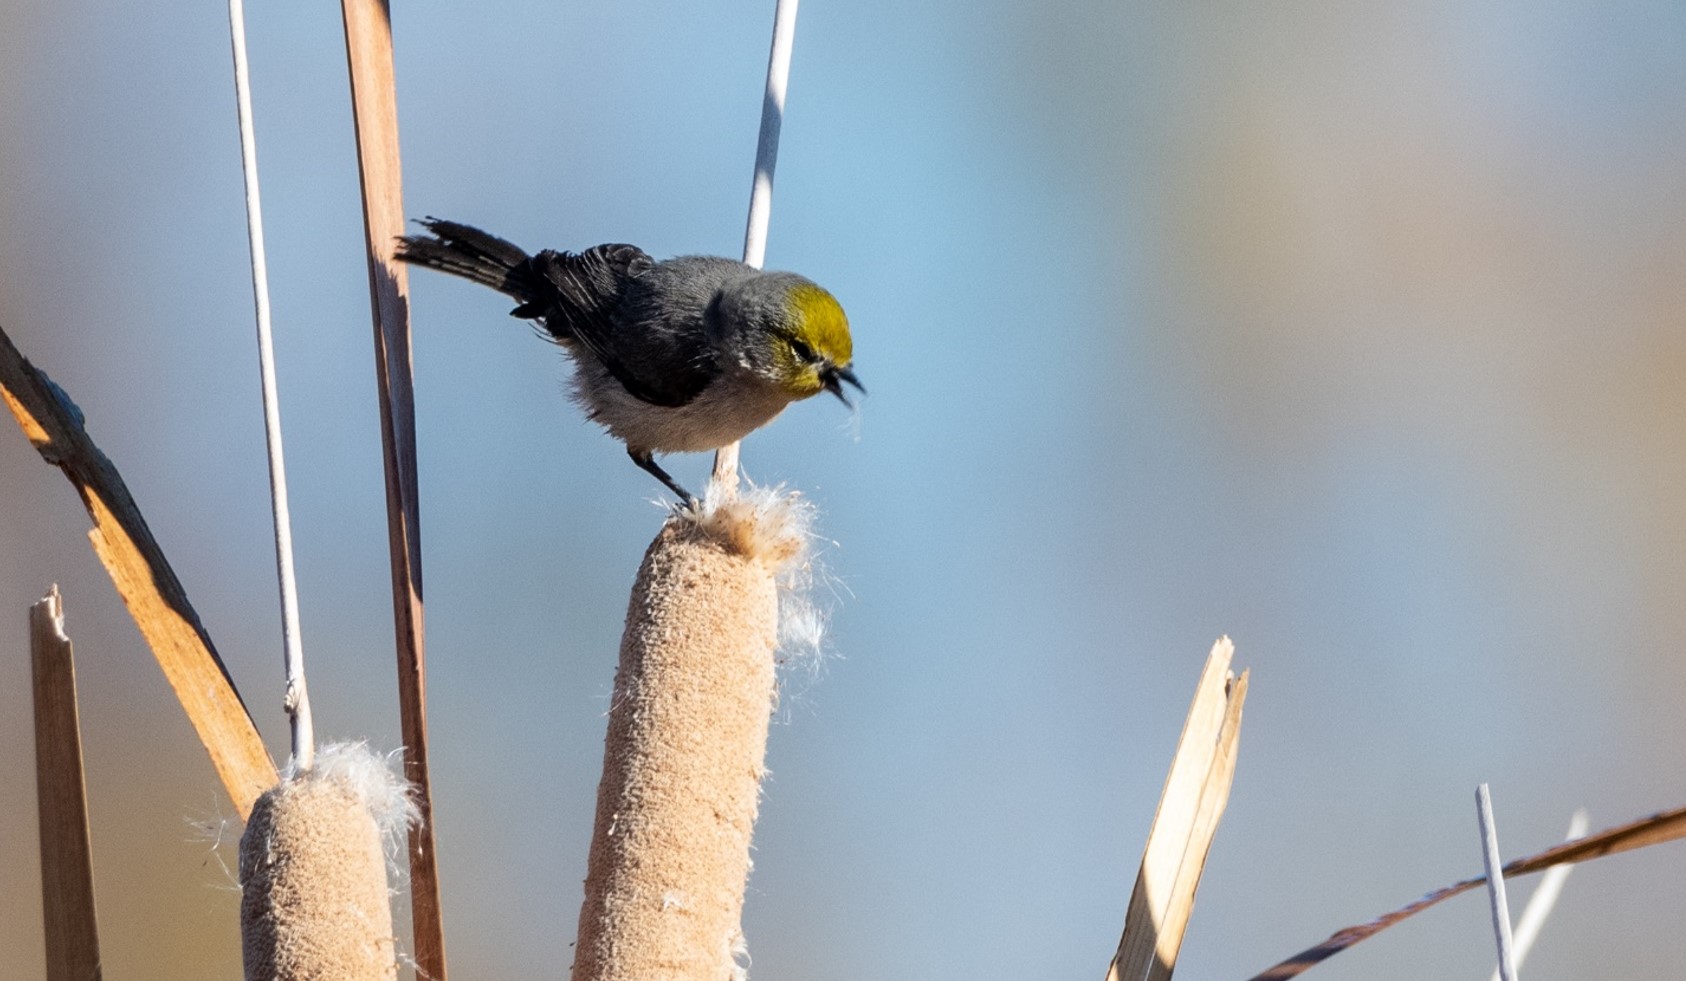 A Verdin, a tiny gray bird with a yellow head, perches on a puffy cattail flower that is starting to burst.